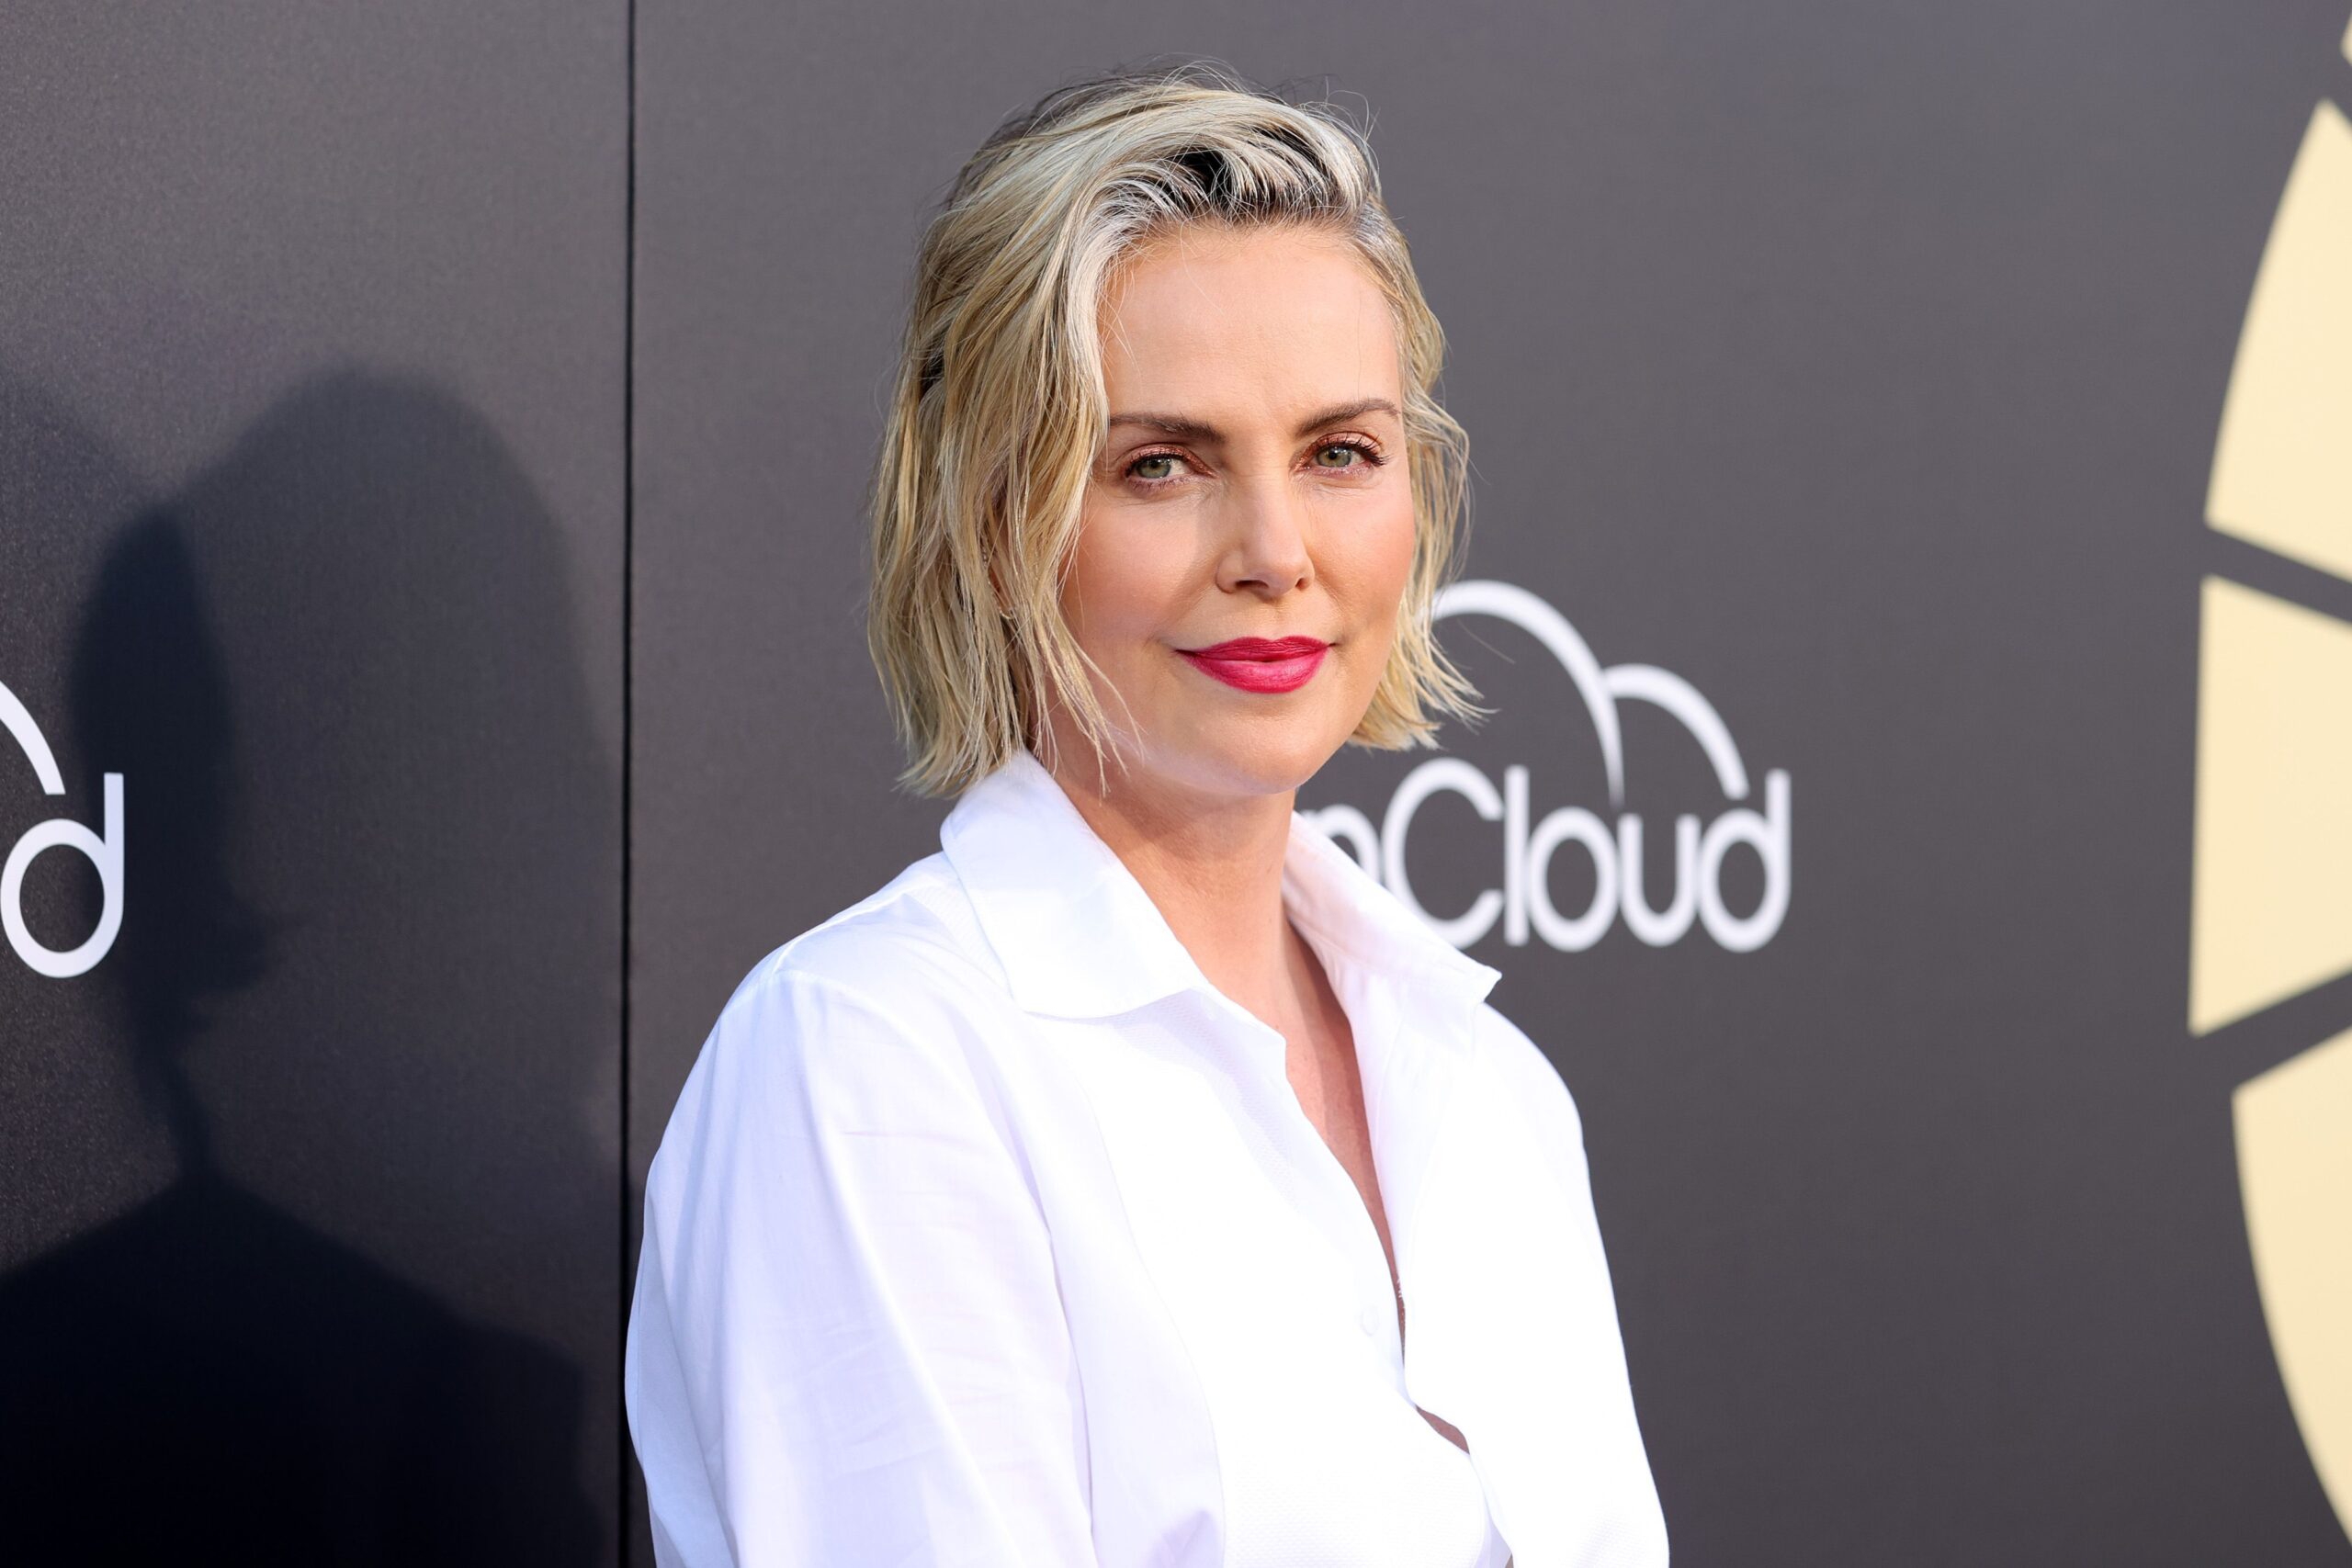 Charlize Theron Allegedly Romancing Another Actor After 7 Years Of Being Single, Dubious Gossip Says